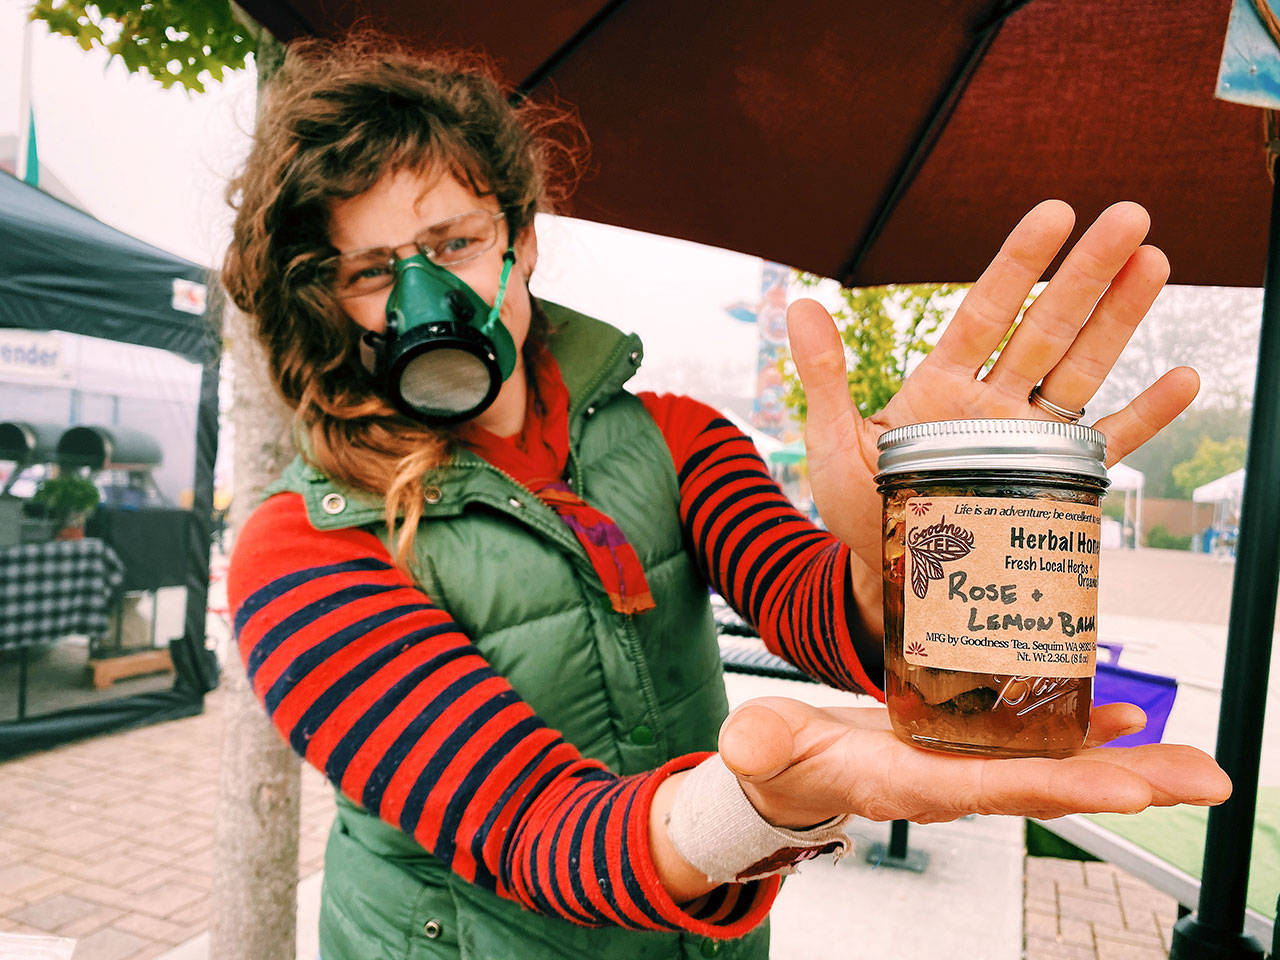 Check out some hand-infused, Northwestern raw honey at Goodness Tea courtesy of Shaelee Evans, at the Sequim Farmers & Artisans Market this Saturday, the final market weekend of the 2020 season. Photo by Emma Jane Garcia